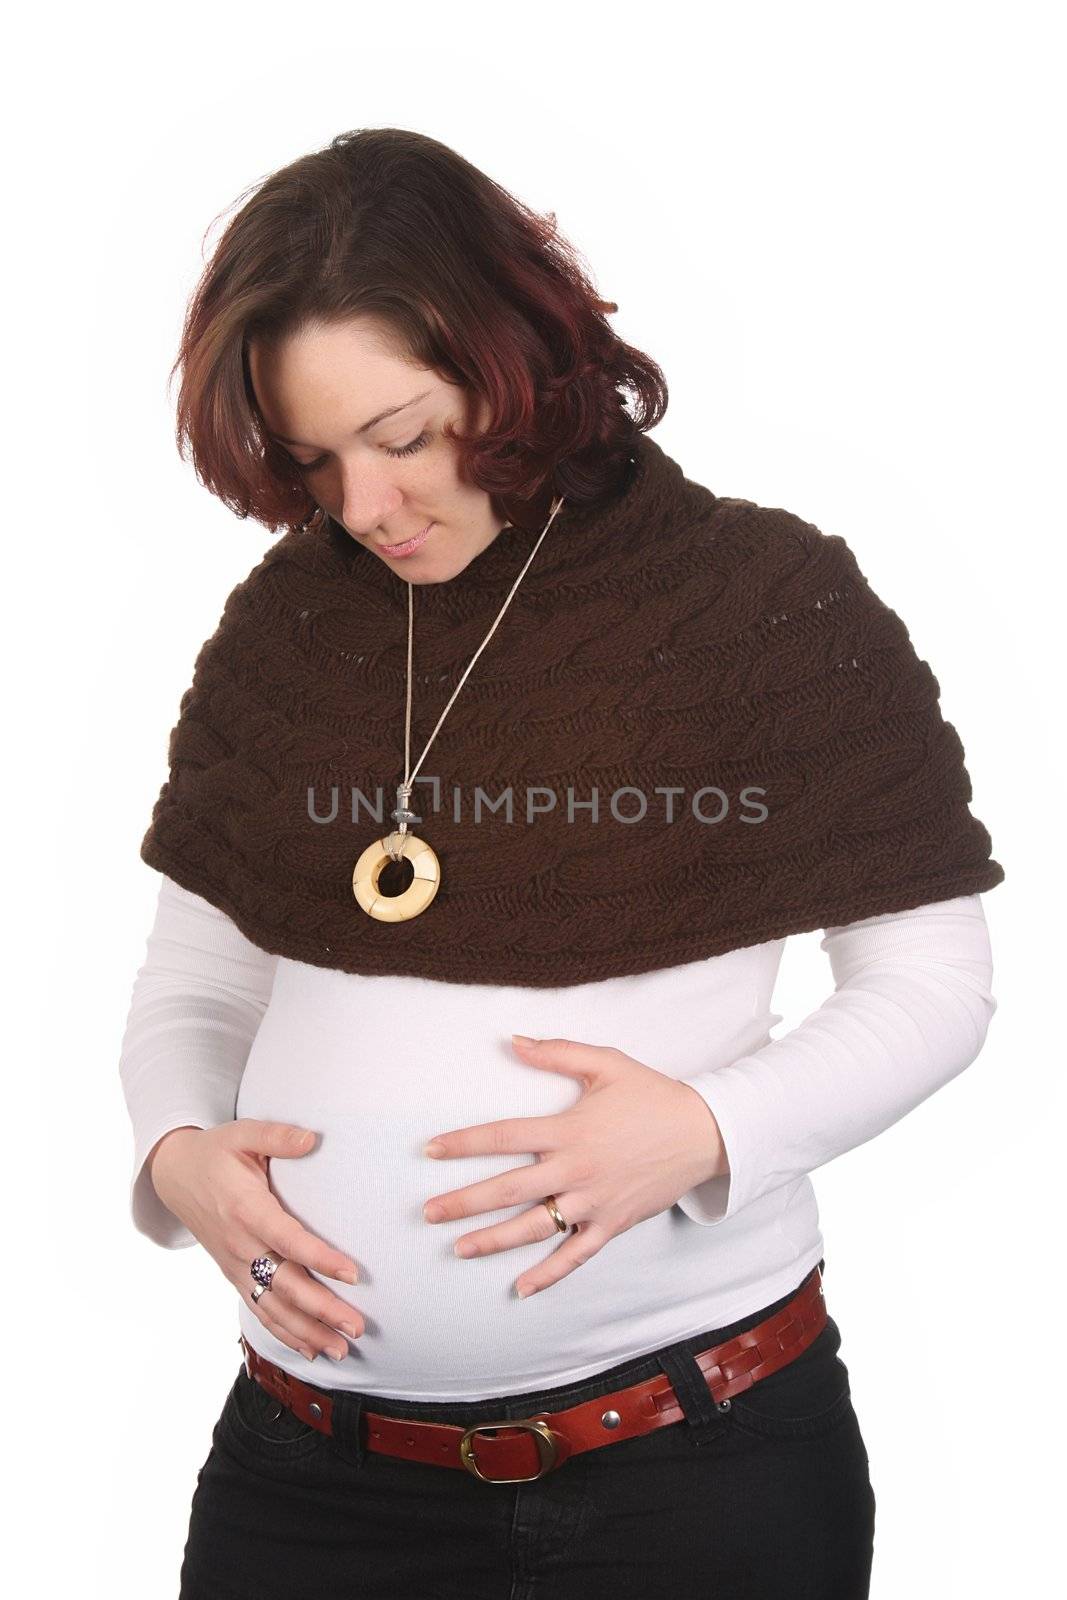 pregnant woman holding belly on white background